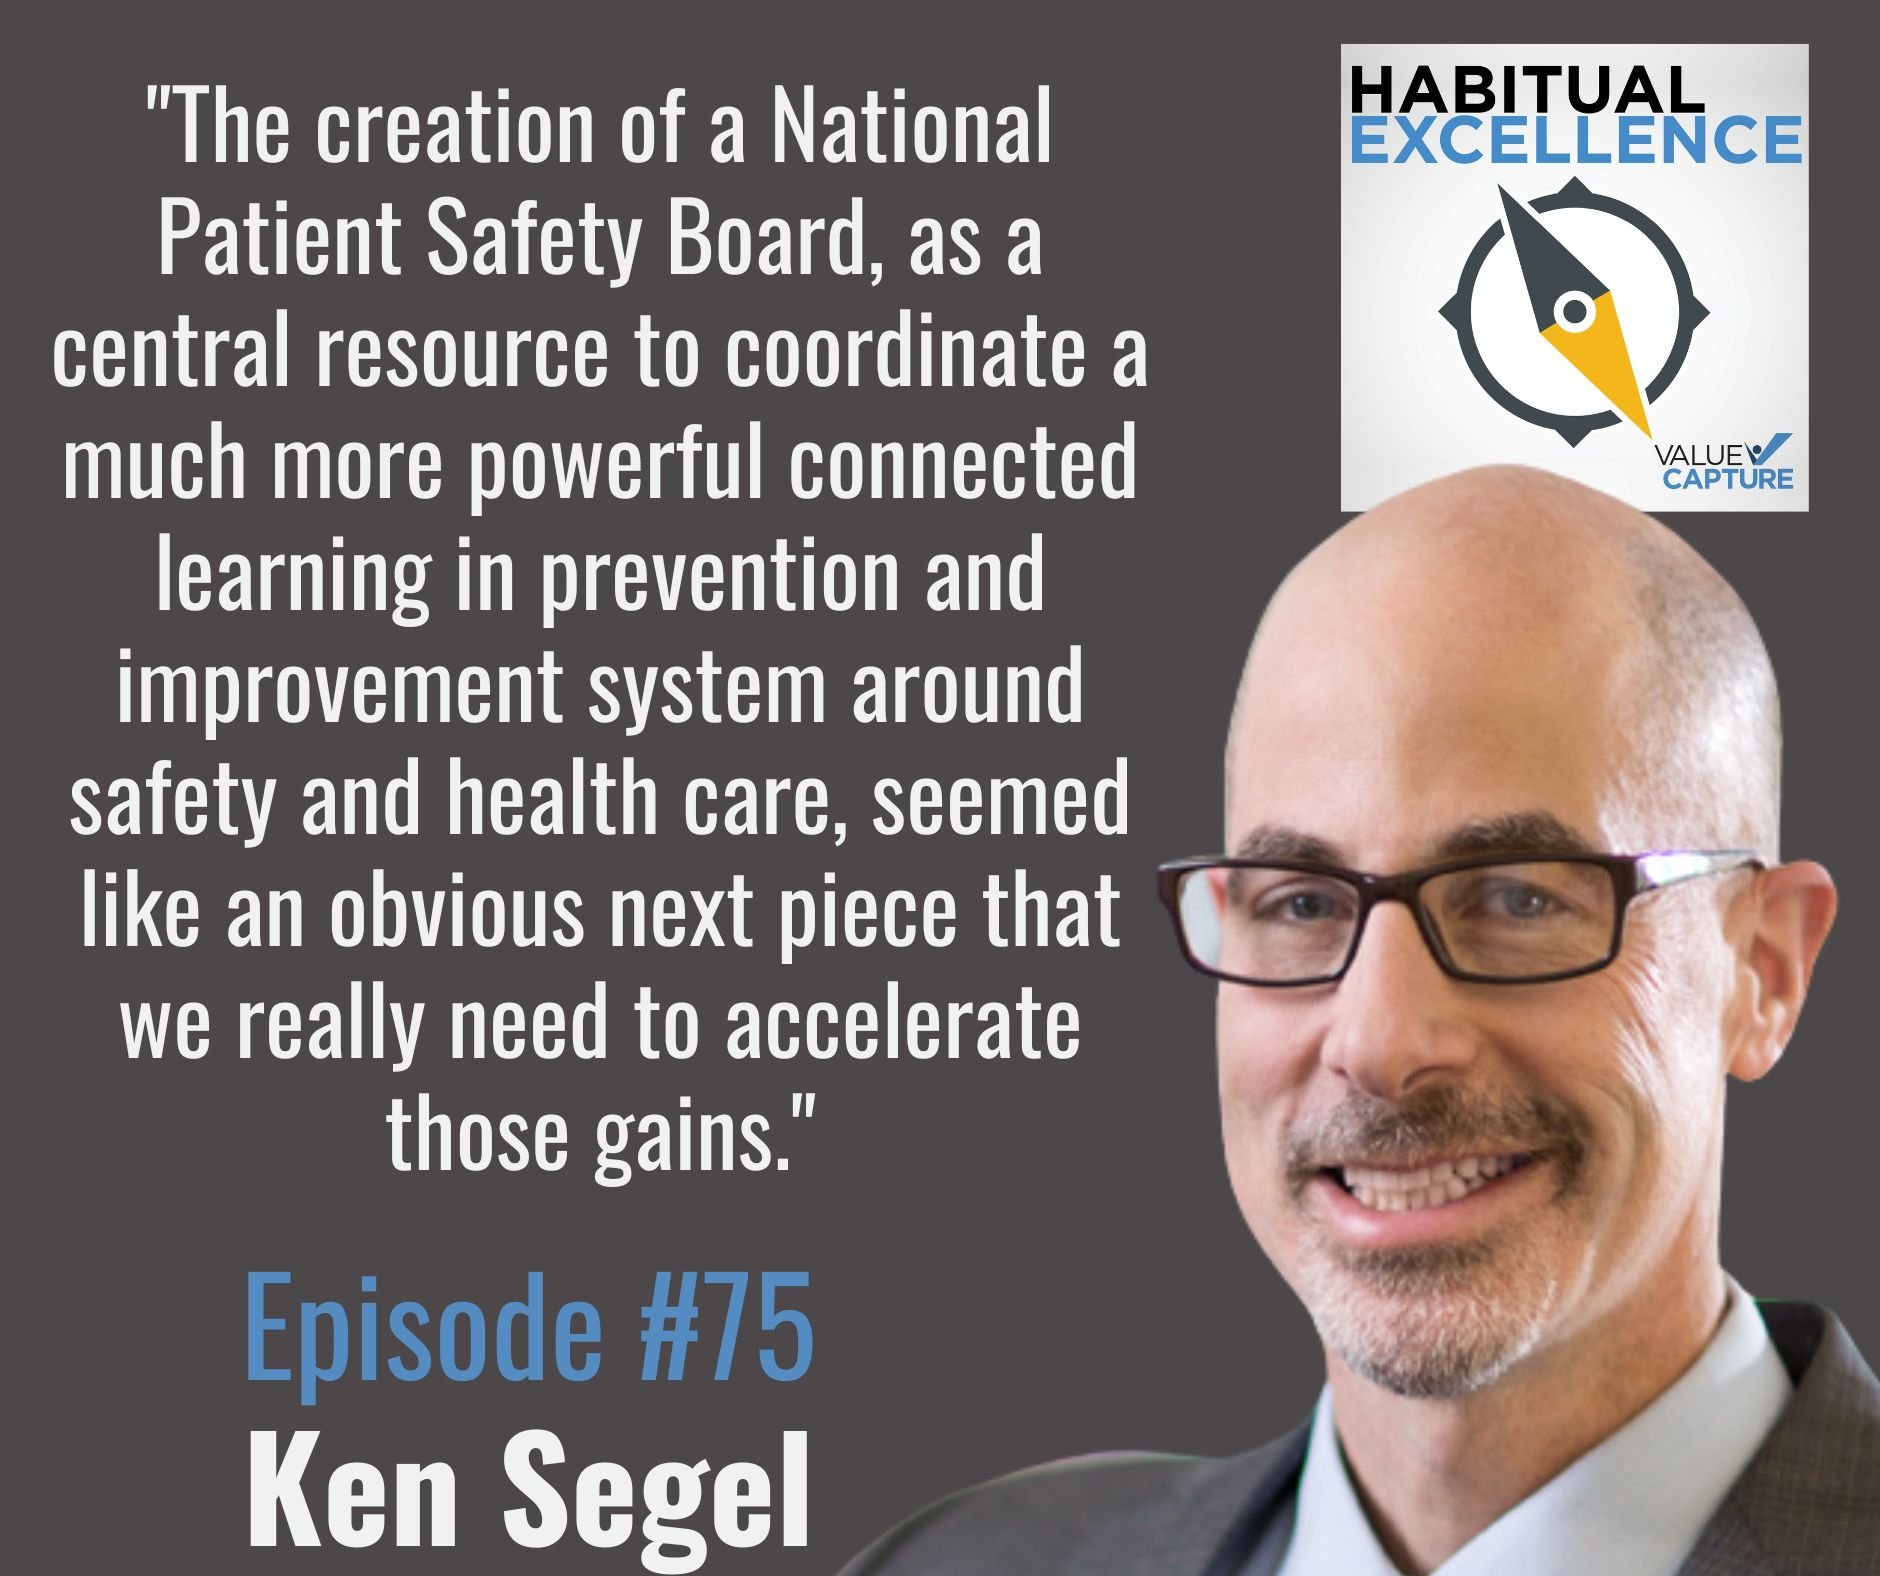 "The creation of a National Patient Safety Board, as a central resource to coordinate a much more powerful connected learning in prevention and improvement system around safety and health care, seemed like an obvious next piece that we really need to accelerate those gains." Ken Segel